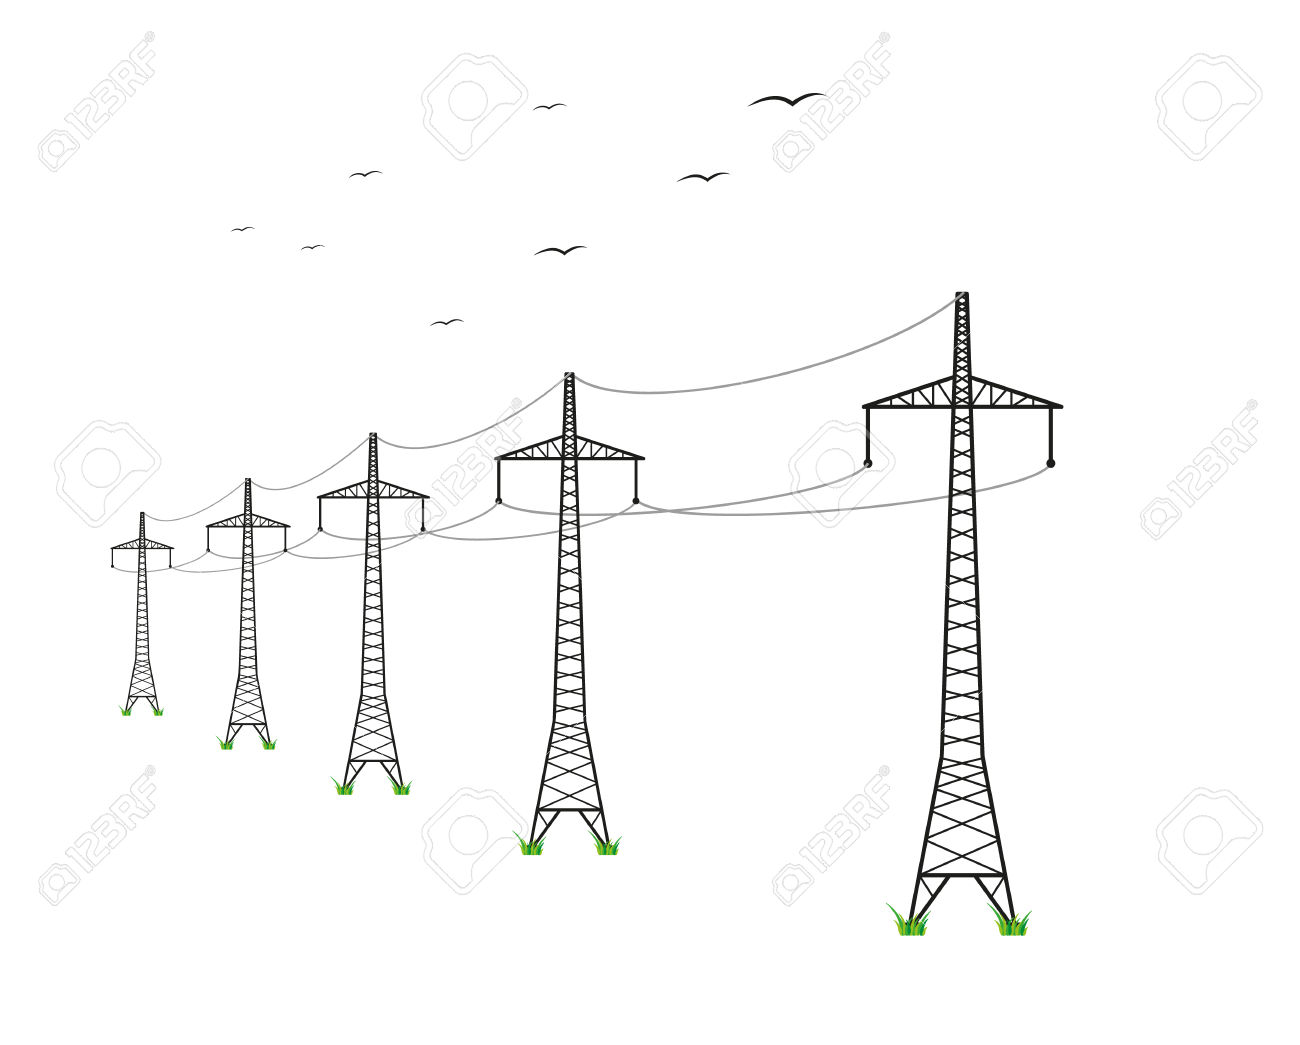 clipart of power lines - photo #24